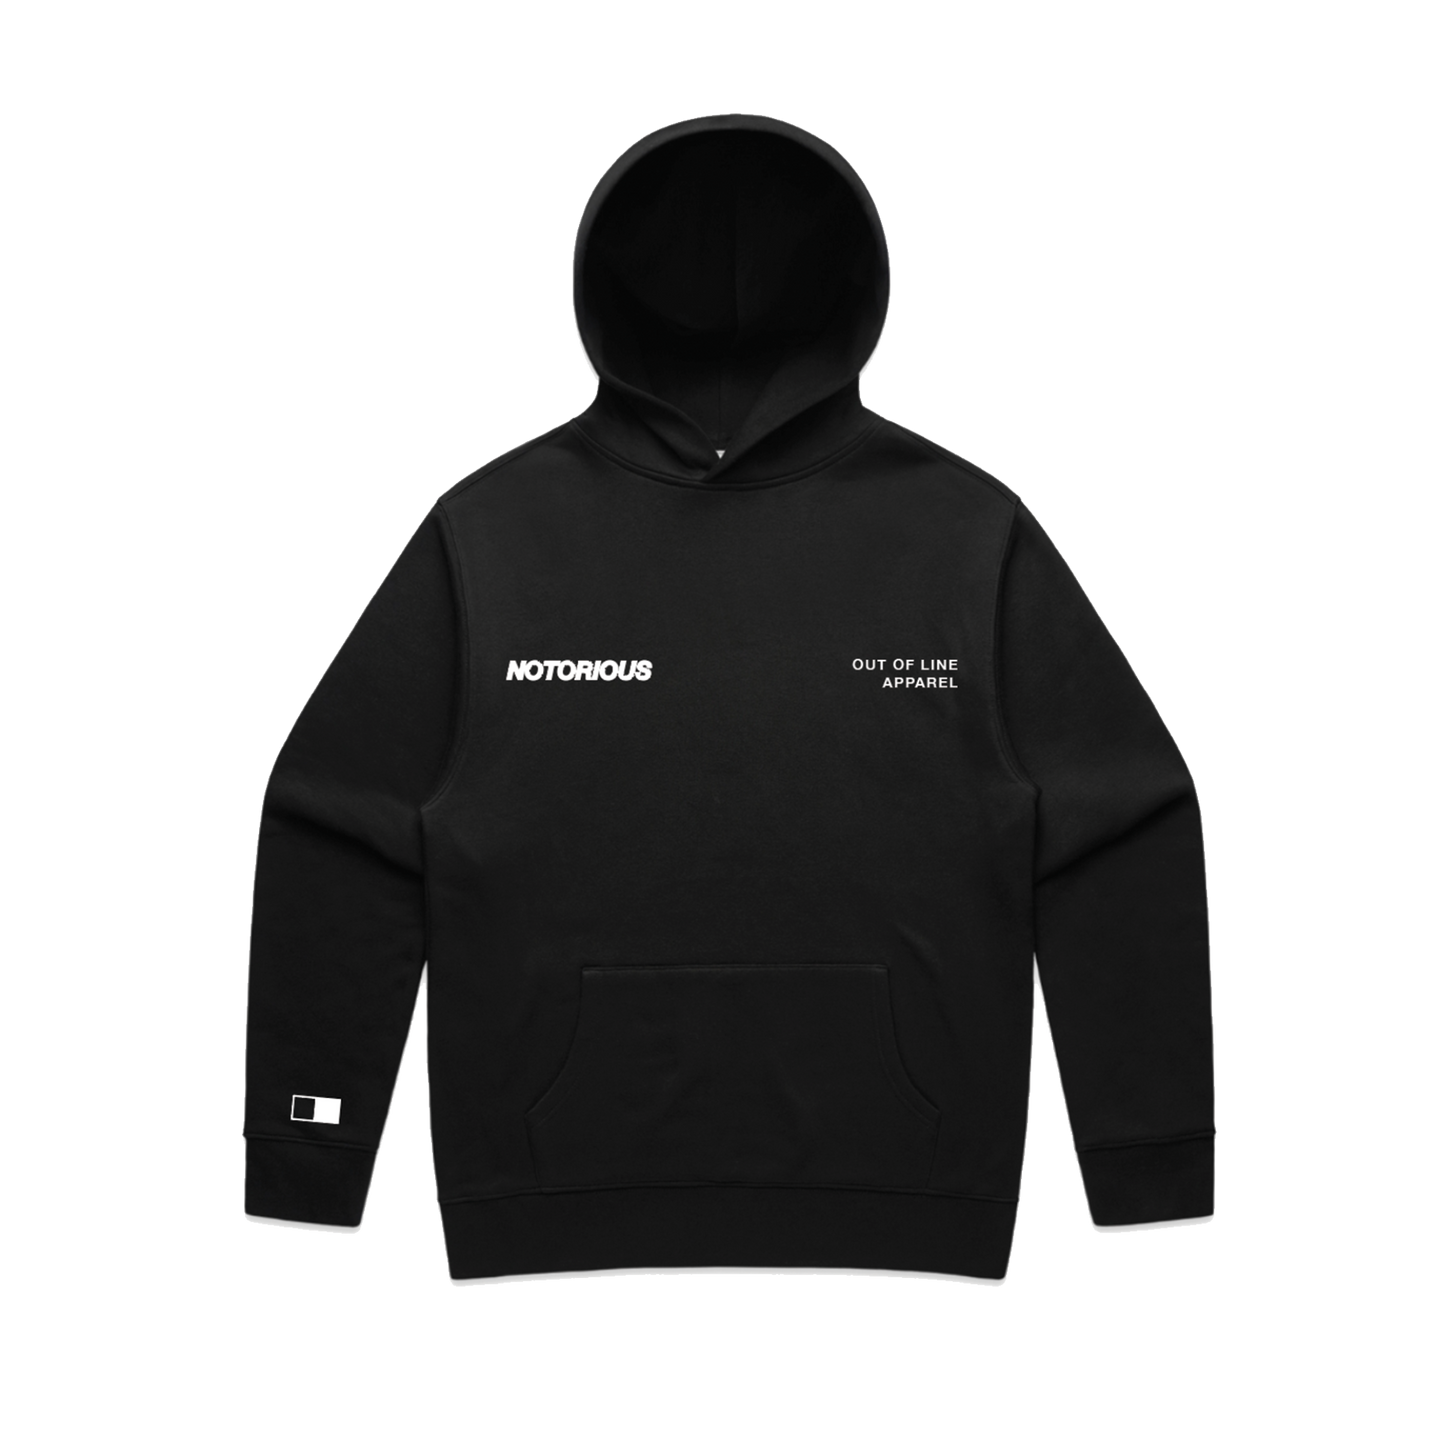 BLACK NOTORIOUS X OUT OF LINE APPAREL COLLAB HOODIE